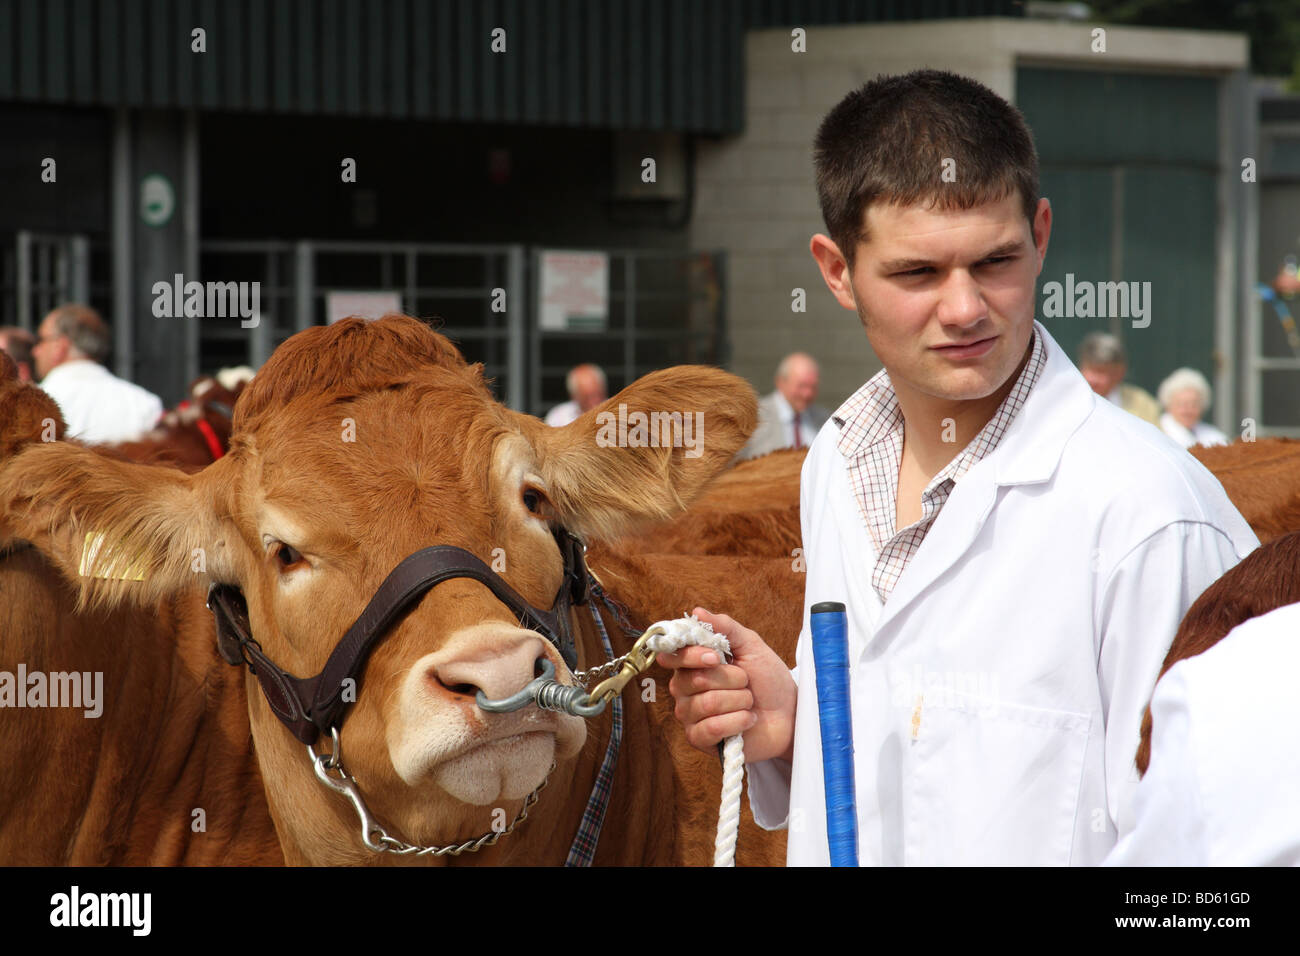 A young farmer with cattle at the Bakewell Show, Bakewell, Derbyshire, England, U.K. Stock Photo